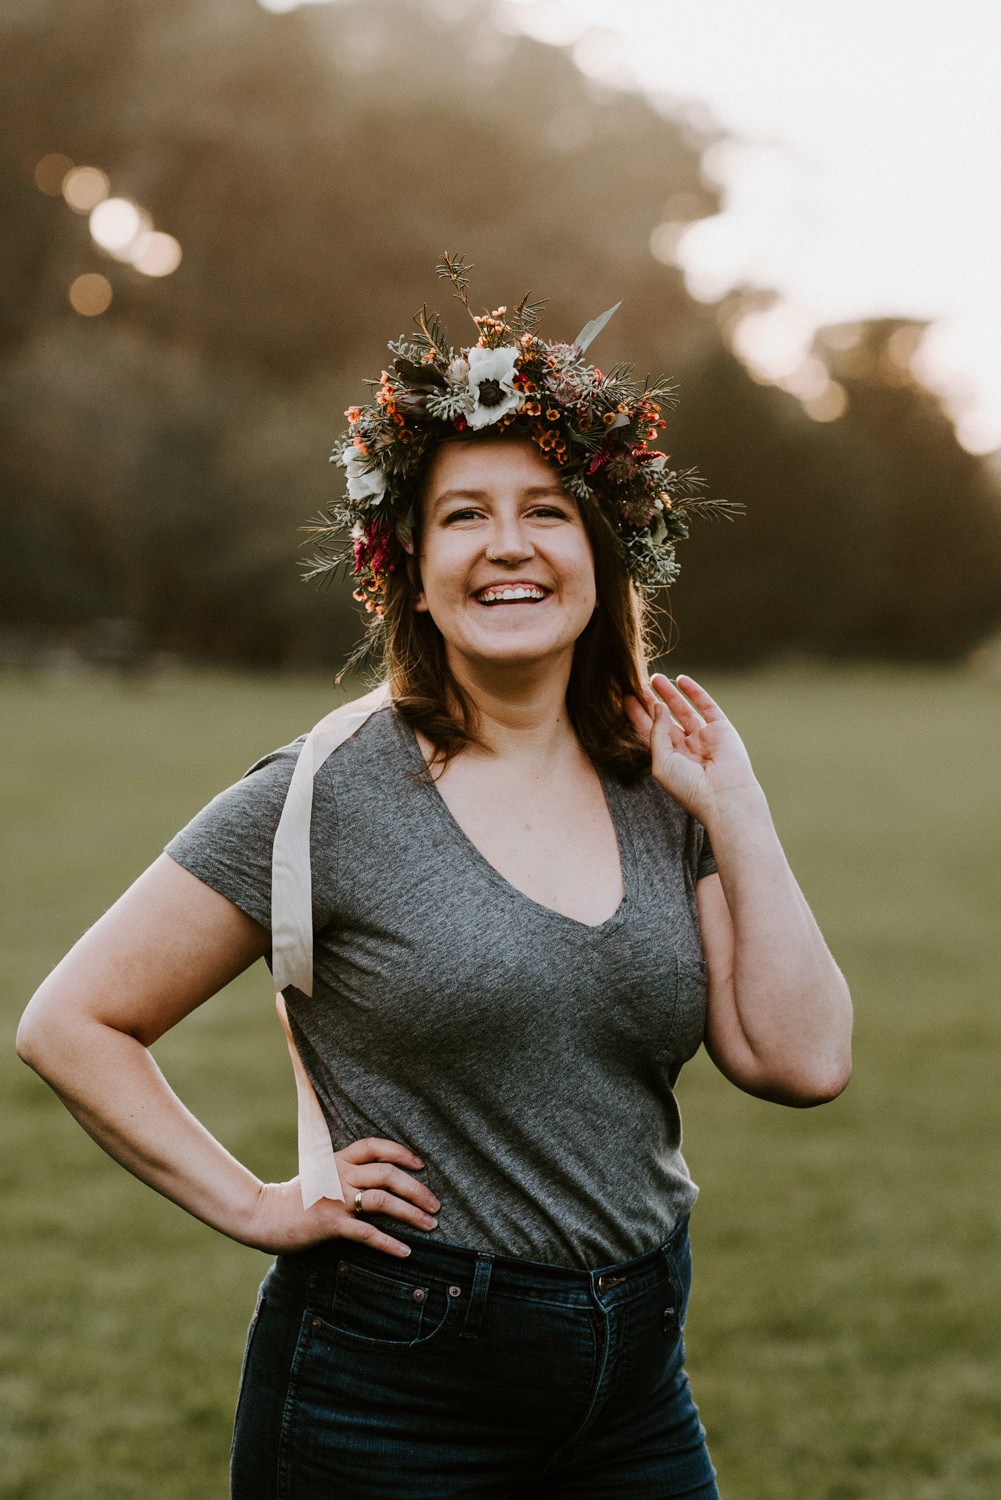 Photo of Lara standing in a field of grass, wearing a flower crown and smiling at the camera